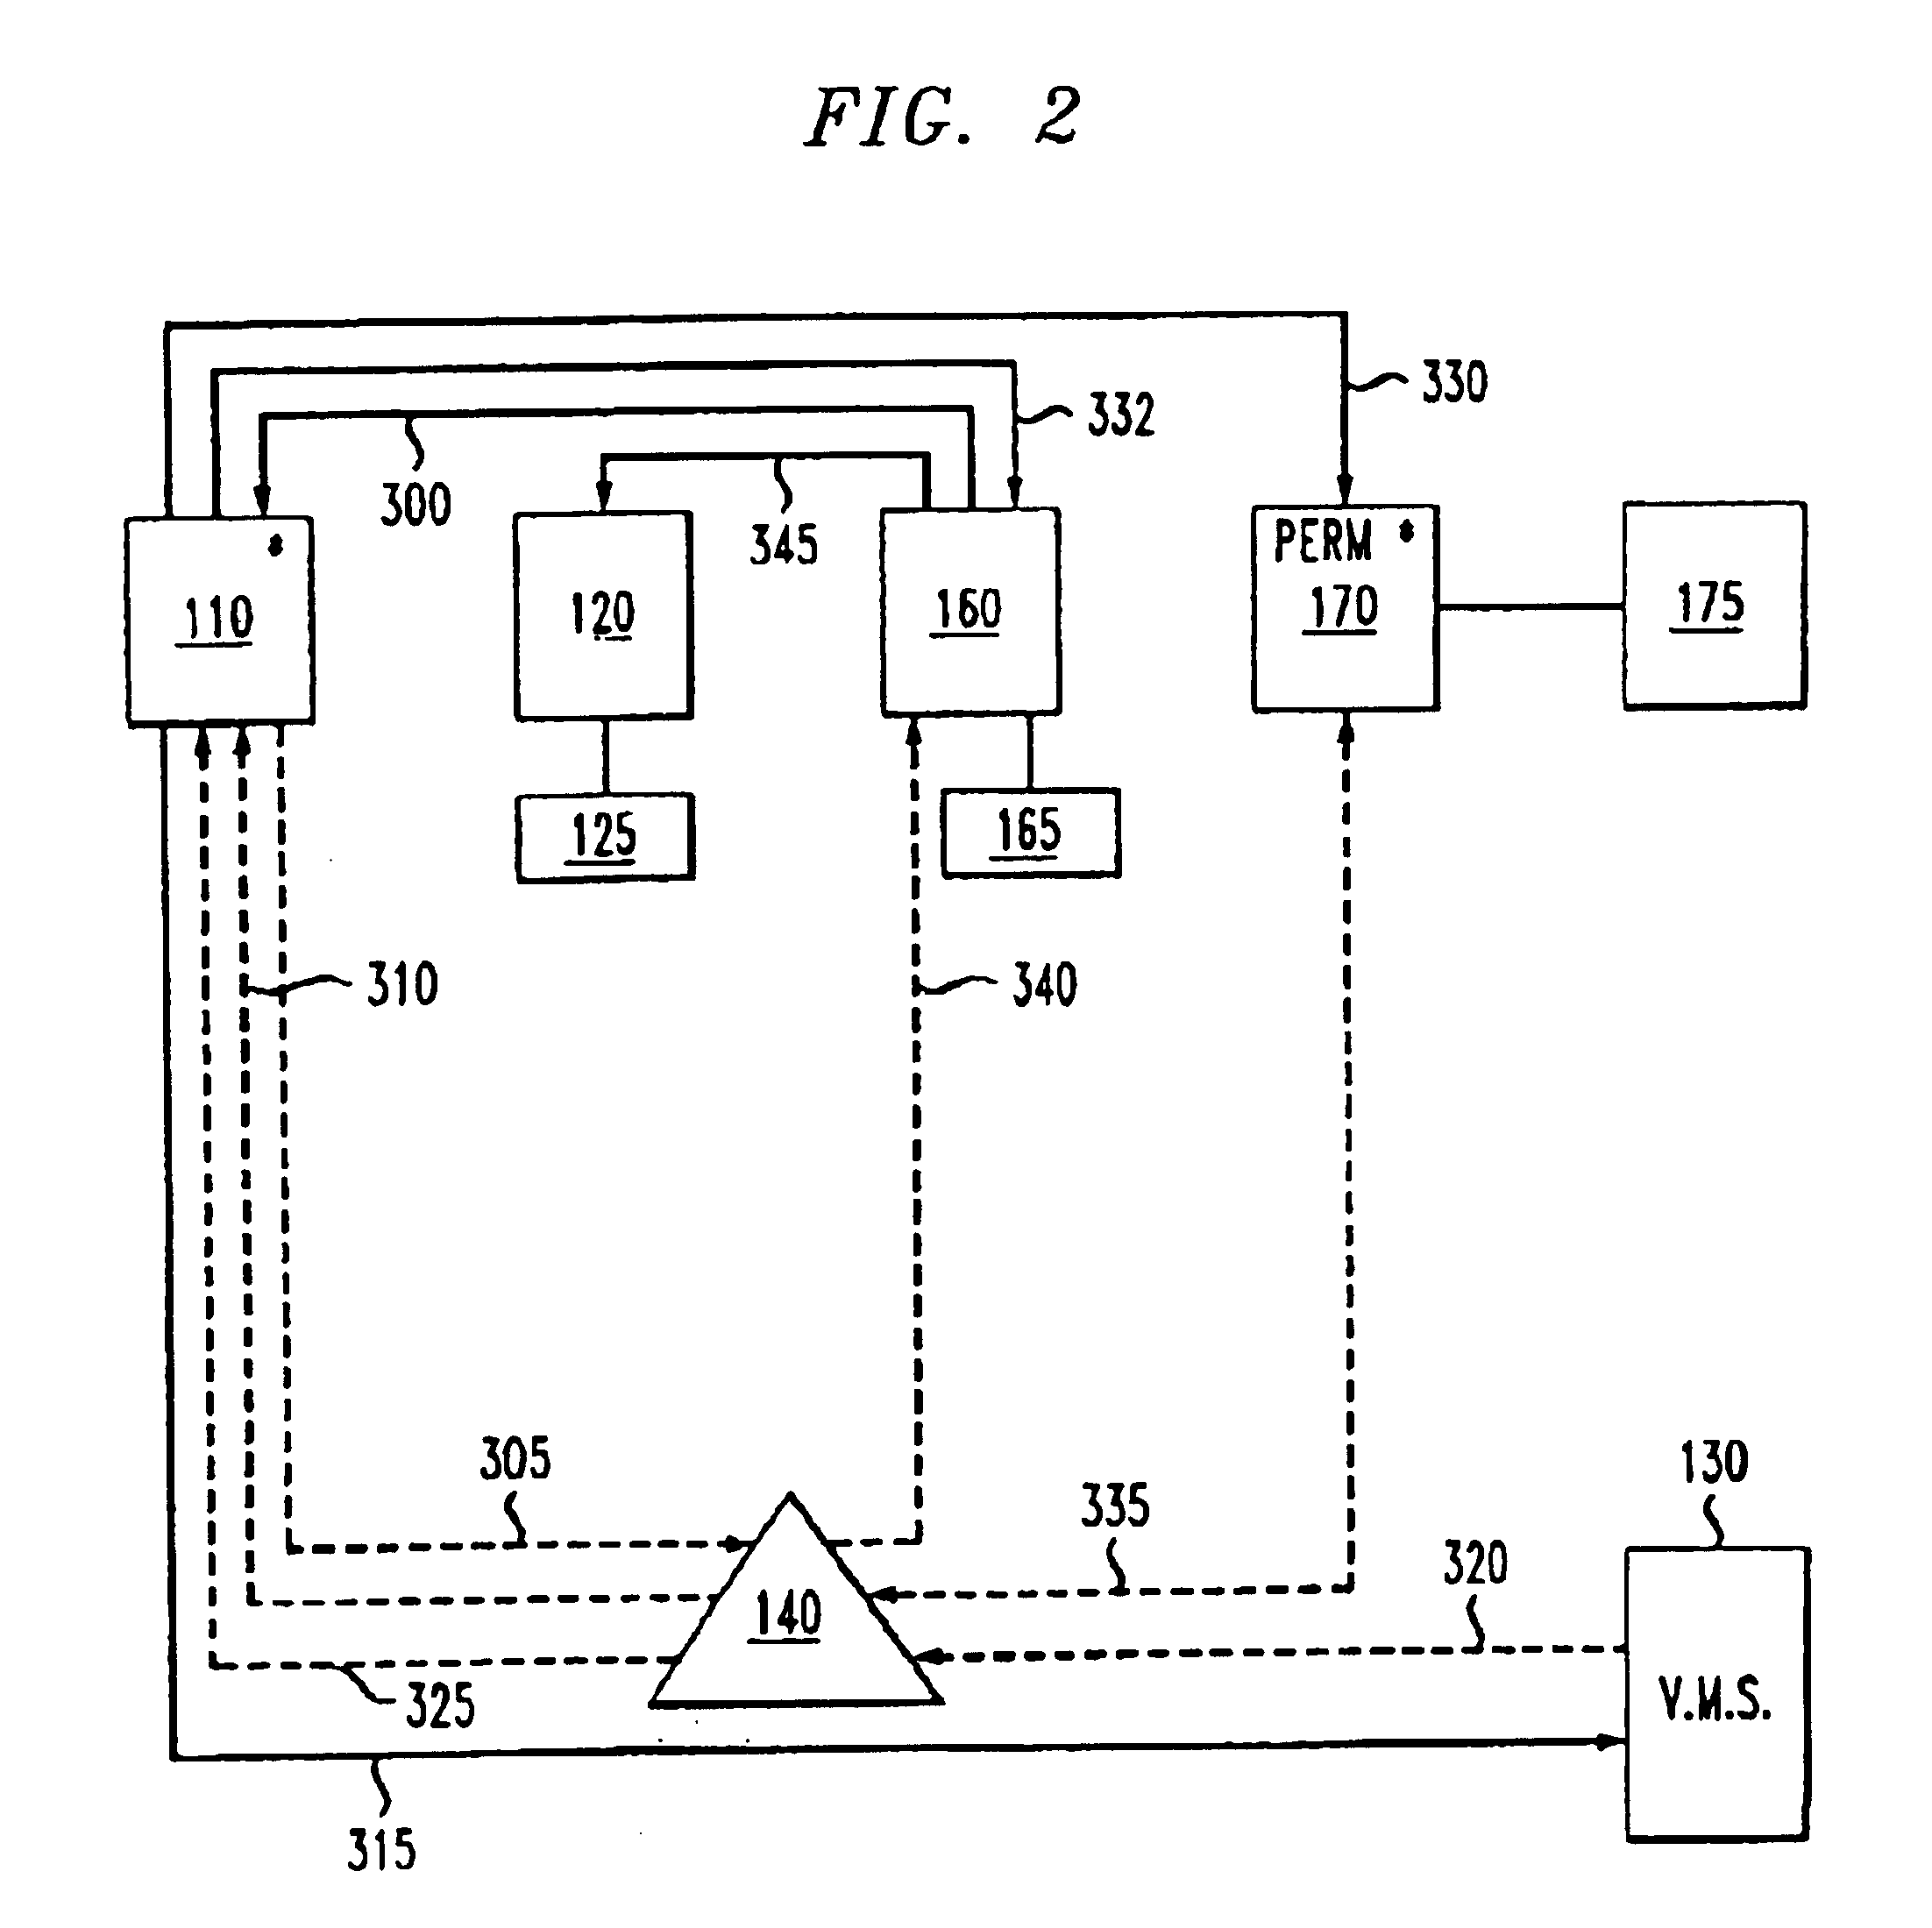 System and method of billing a predetermined telephone line for service utilized by a calling party